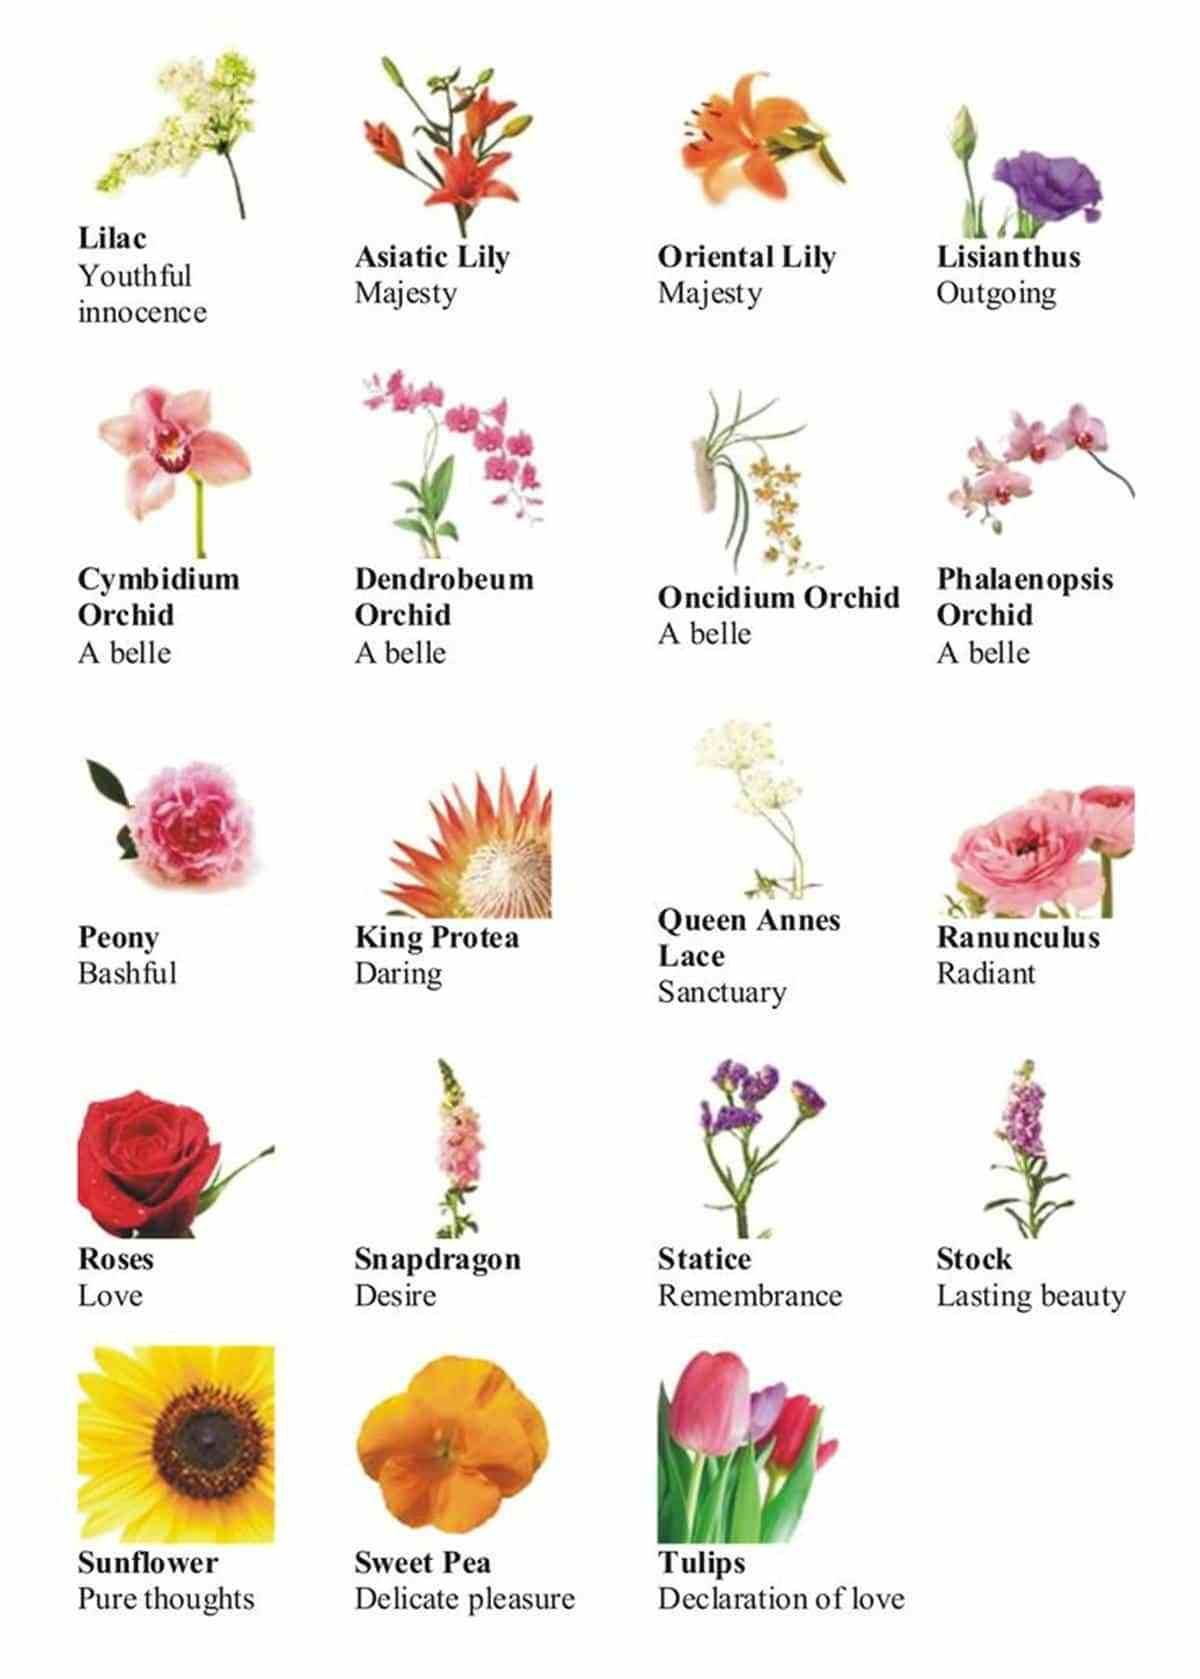 Learn English Vocabulary through Pictures: Flowers and Plants -   16 plants Flowers drawing ideas